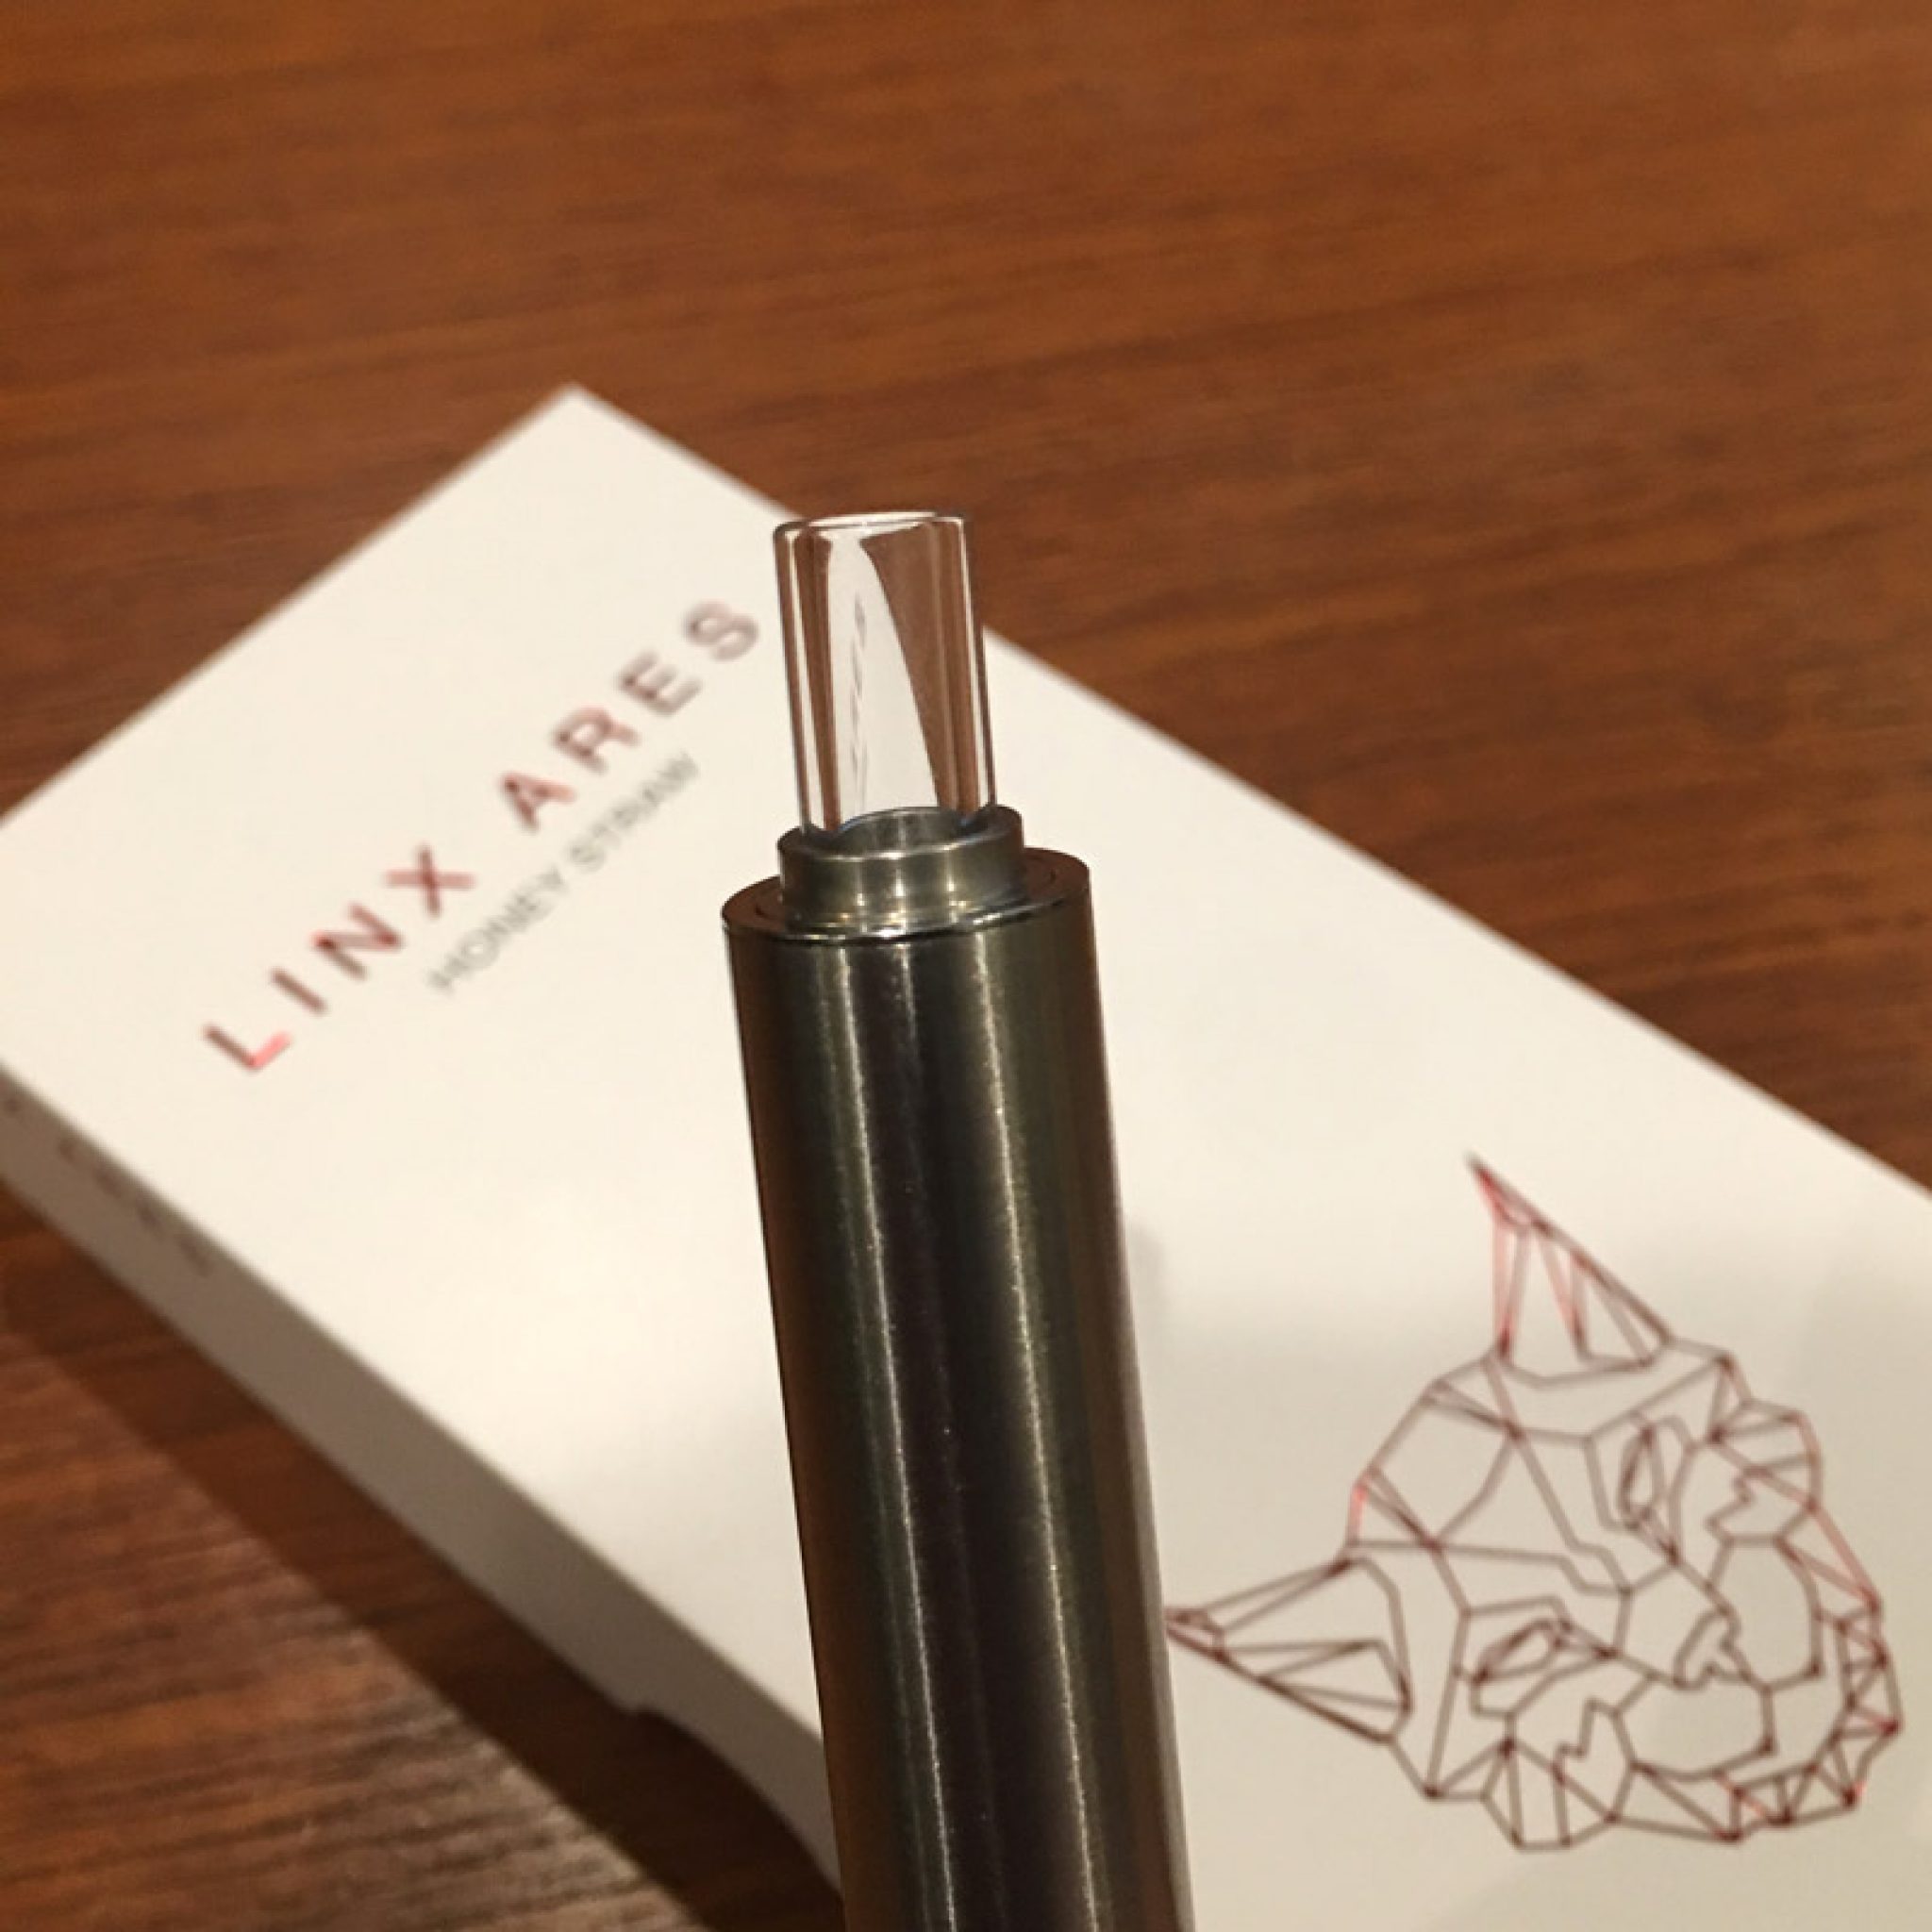 Linx Ares Honey Straw [Review] - Extracts Vape - Cannabis Vape Reviews